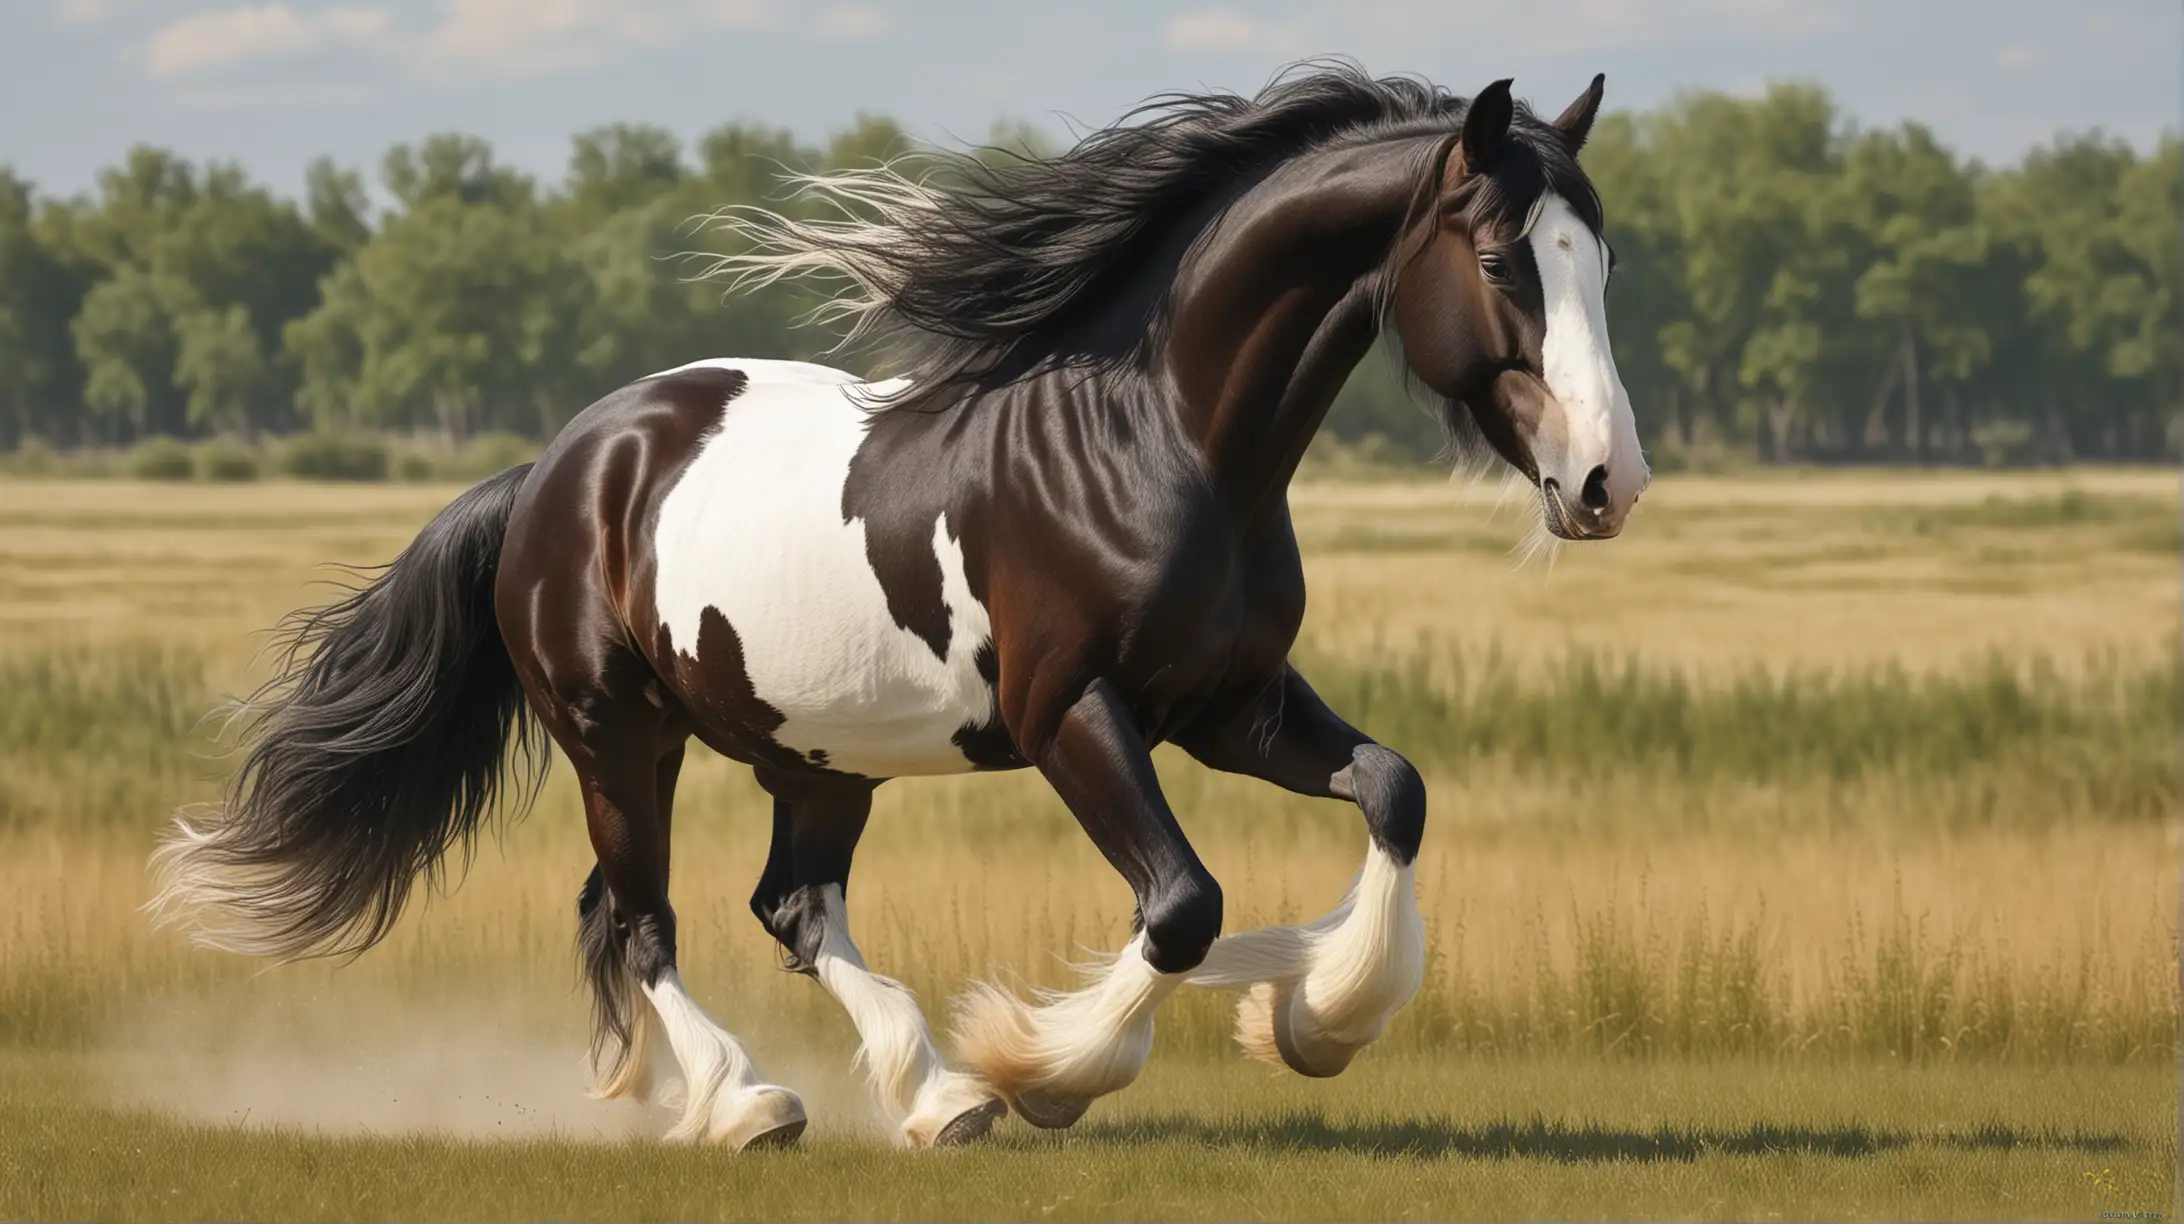 create a hyper realistic image of a running Gypsy Vanner horse, very elegant and pretty, open field background